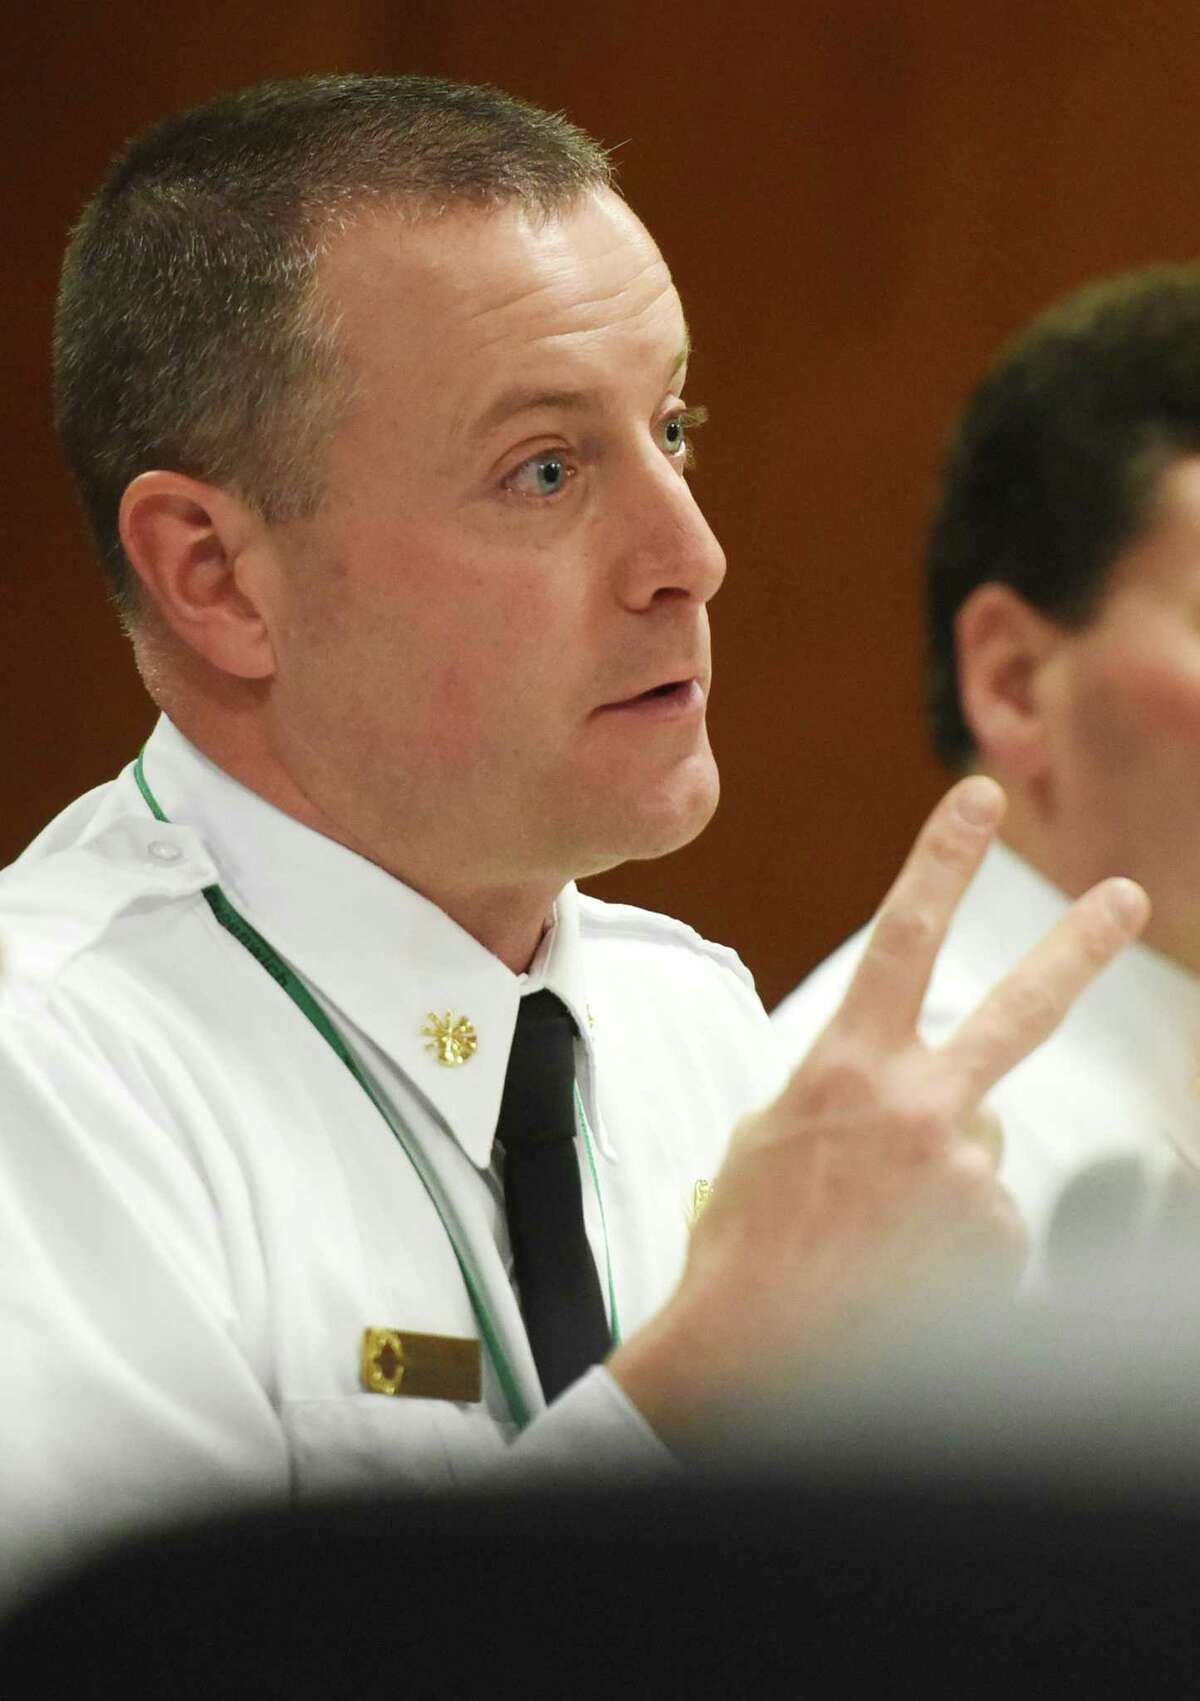 The town’s legal department says the the appointment of Interim Fire Chief Robert Kick to run the fire department while a permanent chief is searched for was done properly within the town charter.